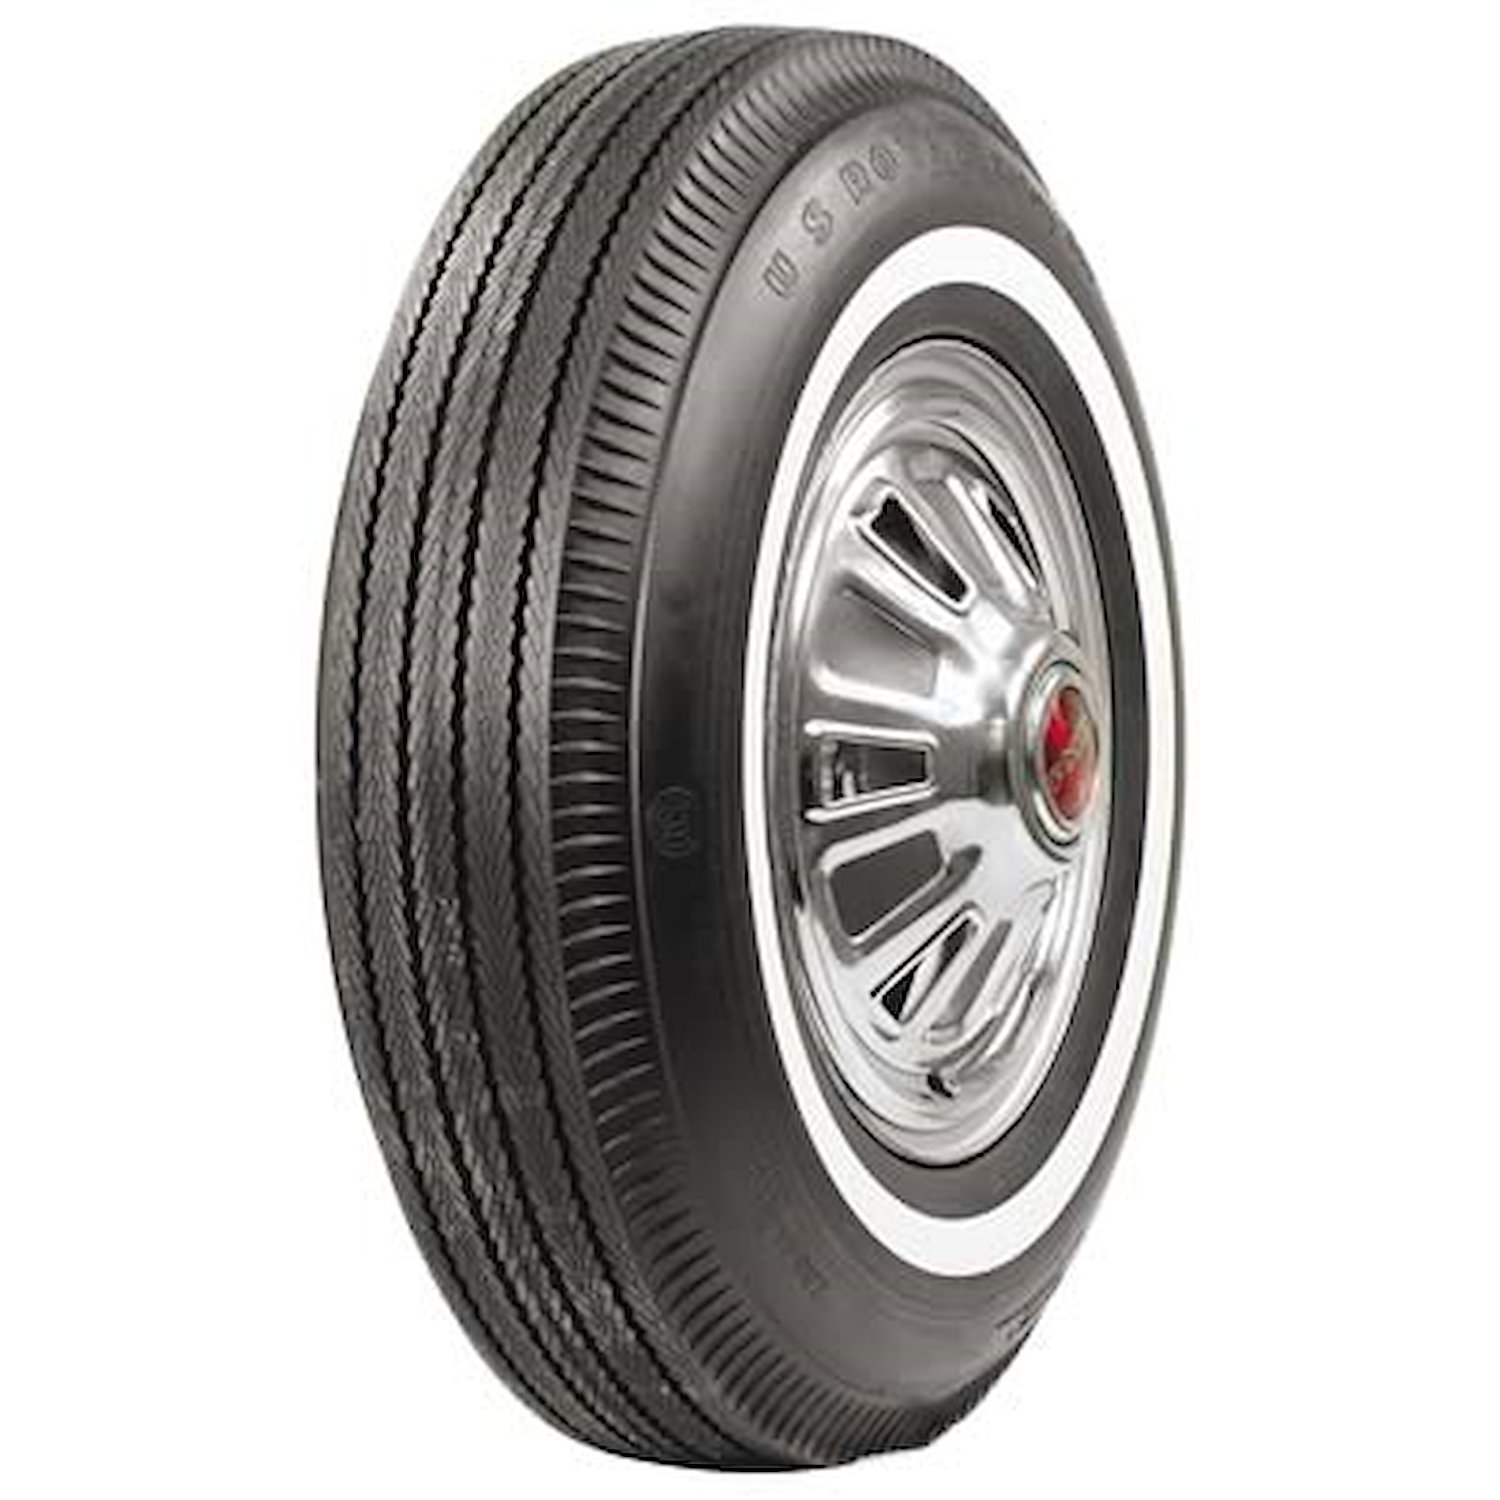 57630 Tire, US Royal 2.50-Inch Whitewall, 670-15